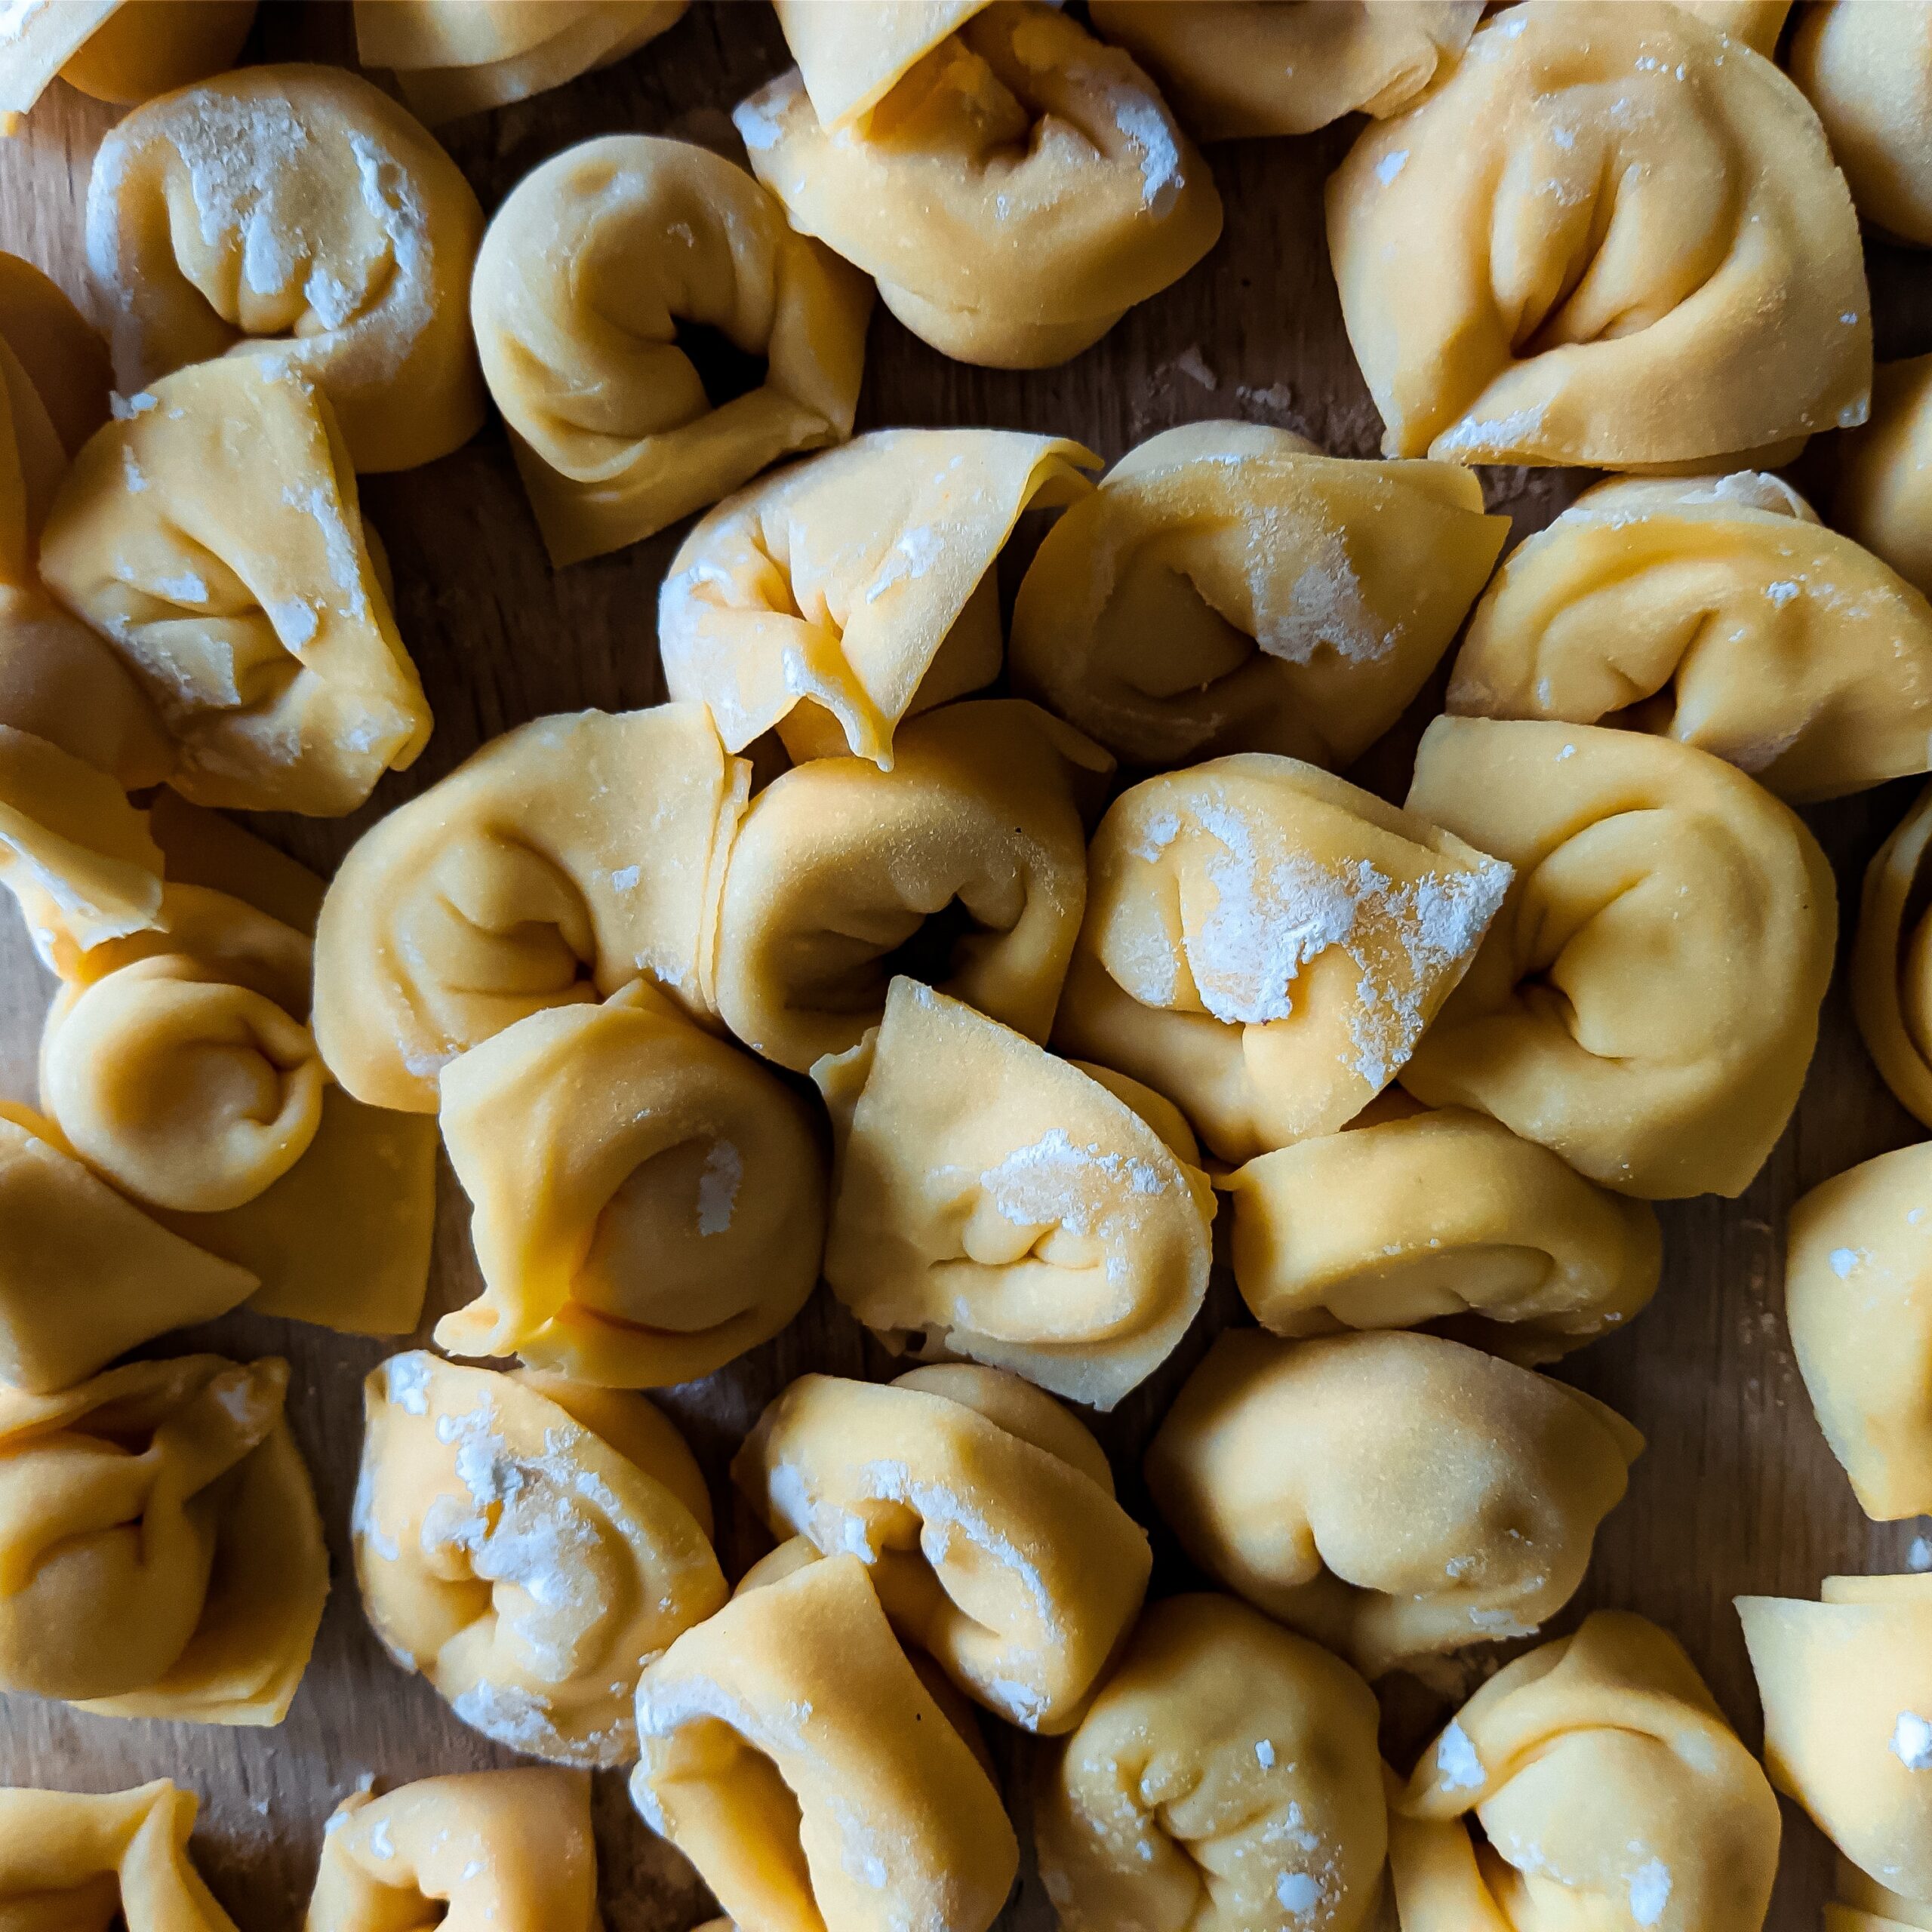 Learn Pasta Making Secrets On Our Private Cooking Class With A Local In Milan